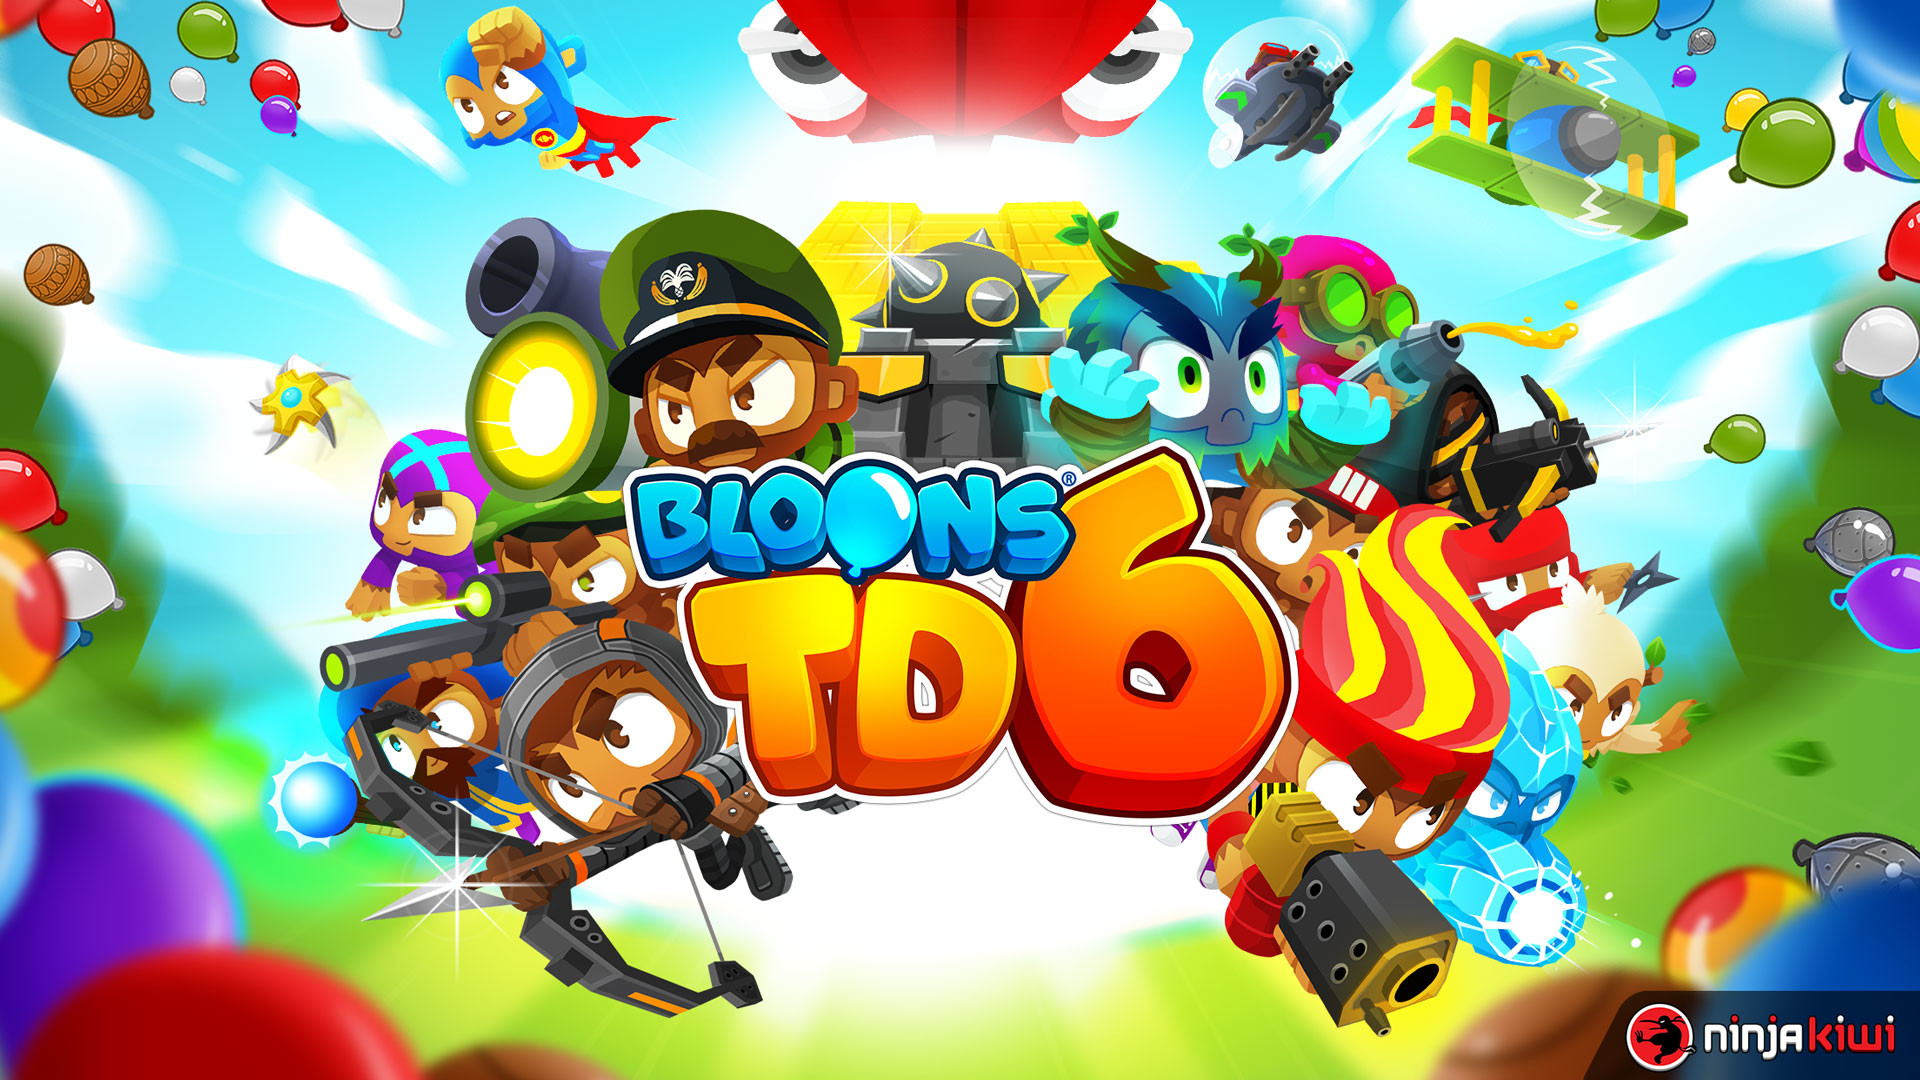 HD wallpaper of Bloons TD 6 featuring colorful characters and balloons with game logo for desktop background.